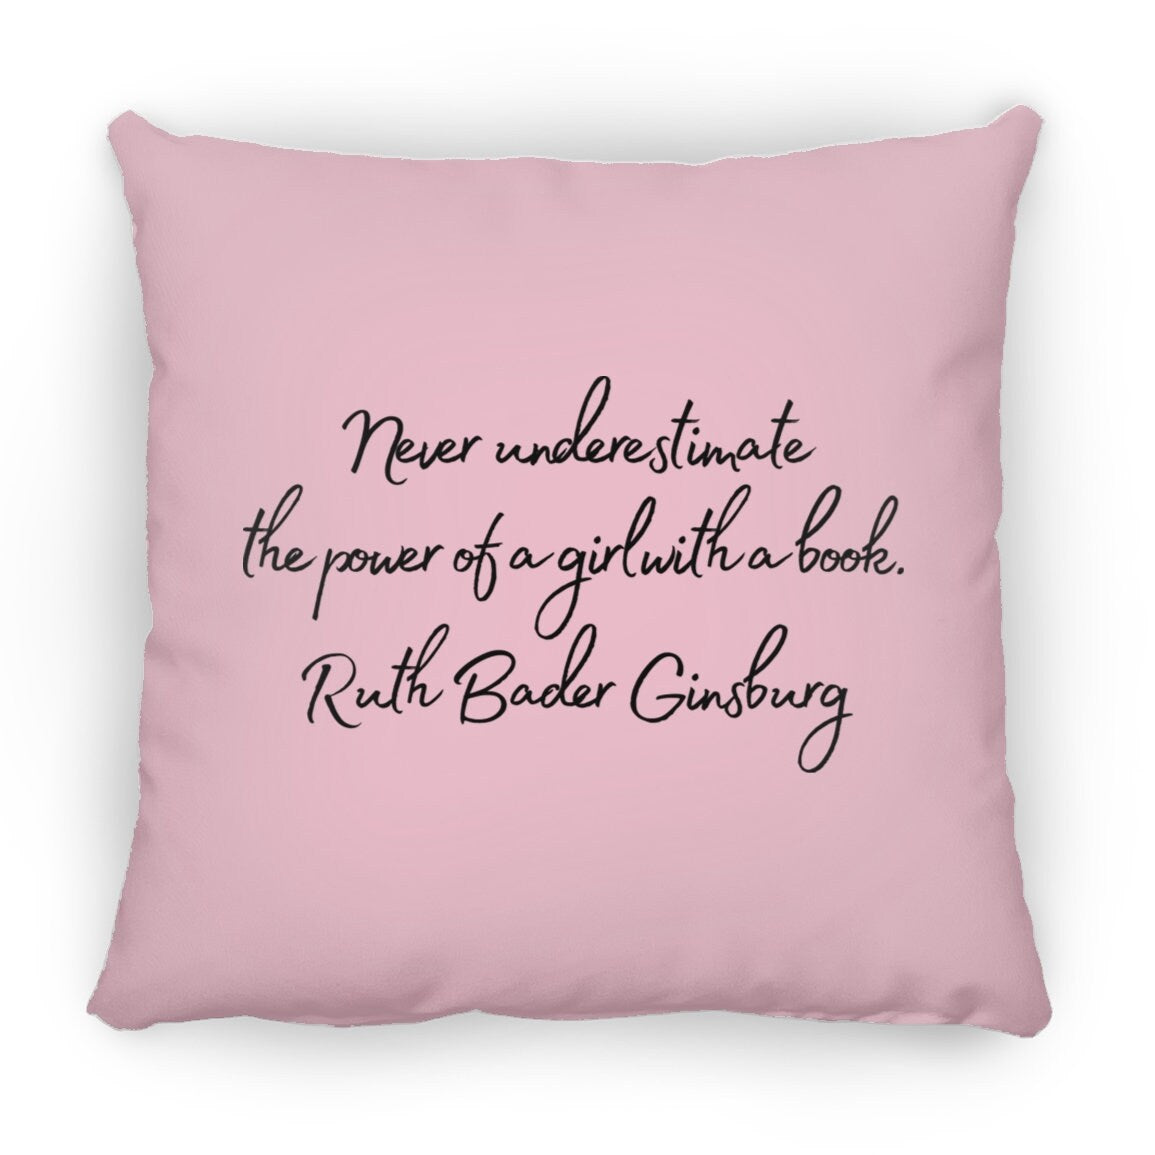 Ruth Bader Ginsburg Never underestimate the power of a girl with a book. Feminist Throw Pillow